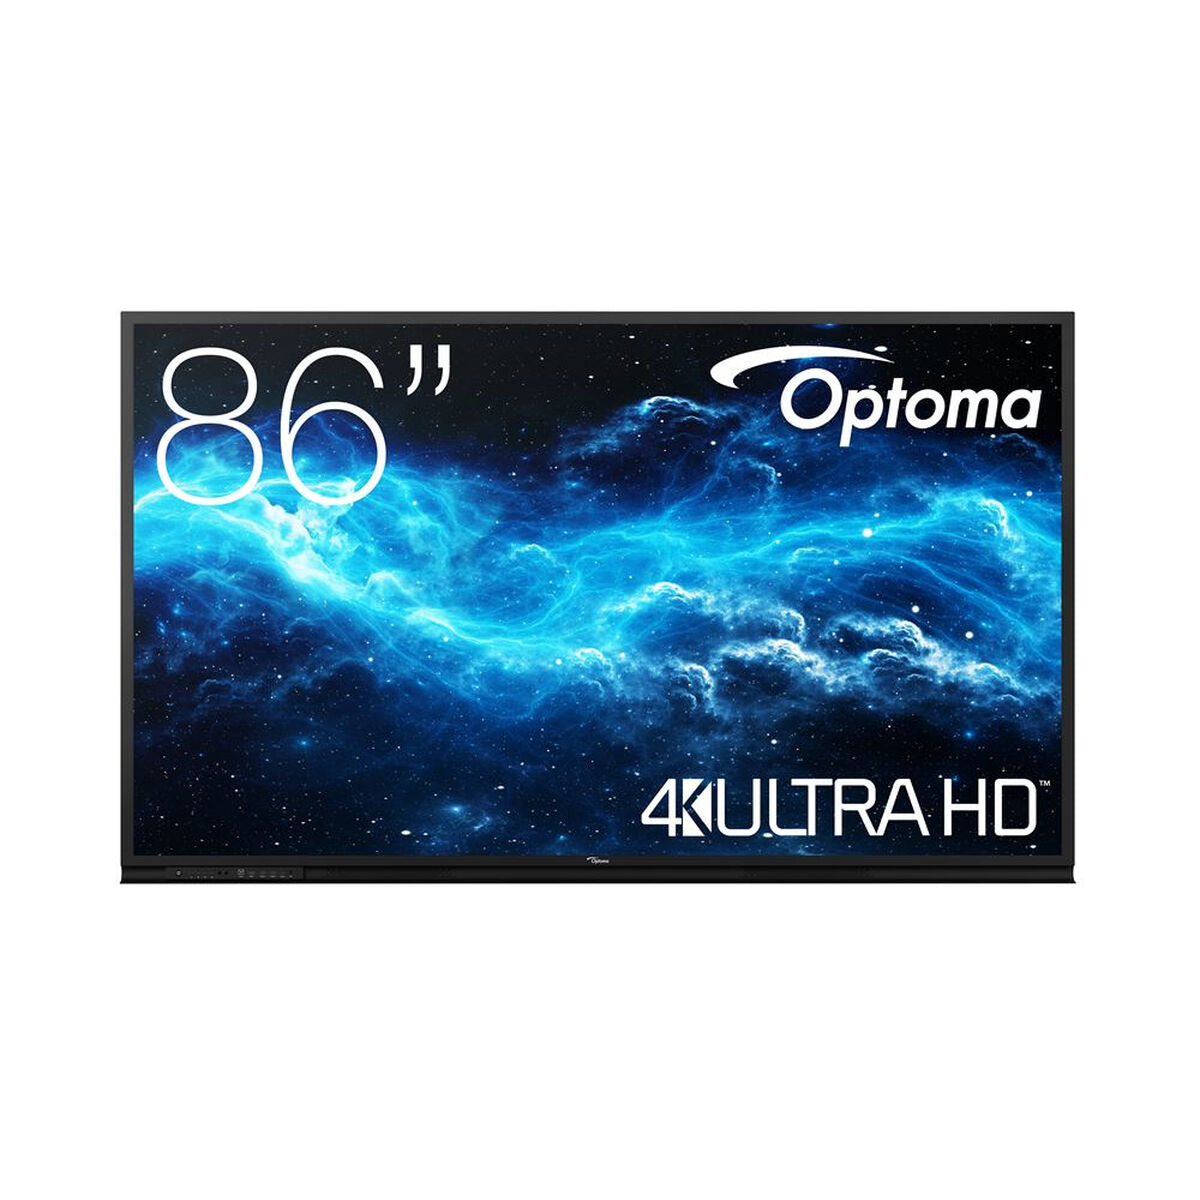 Interactive Touch Screen Optoma 3862RK ENI 86" IPS 60 Hz, Optoma, Computing, interactive-touch-screen-optoma-3862rk-eni-86-ips-60-hz, Brand_Optoma, category-reference-2609, category-reference-2642, category-reference-2644, category-reference-t-19685, computers / peripherals, Condition_NEW, office, Price_+ 1000, Teleworking, RiotNook